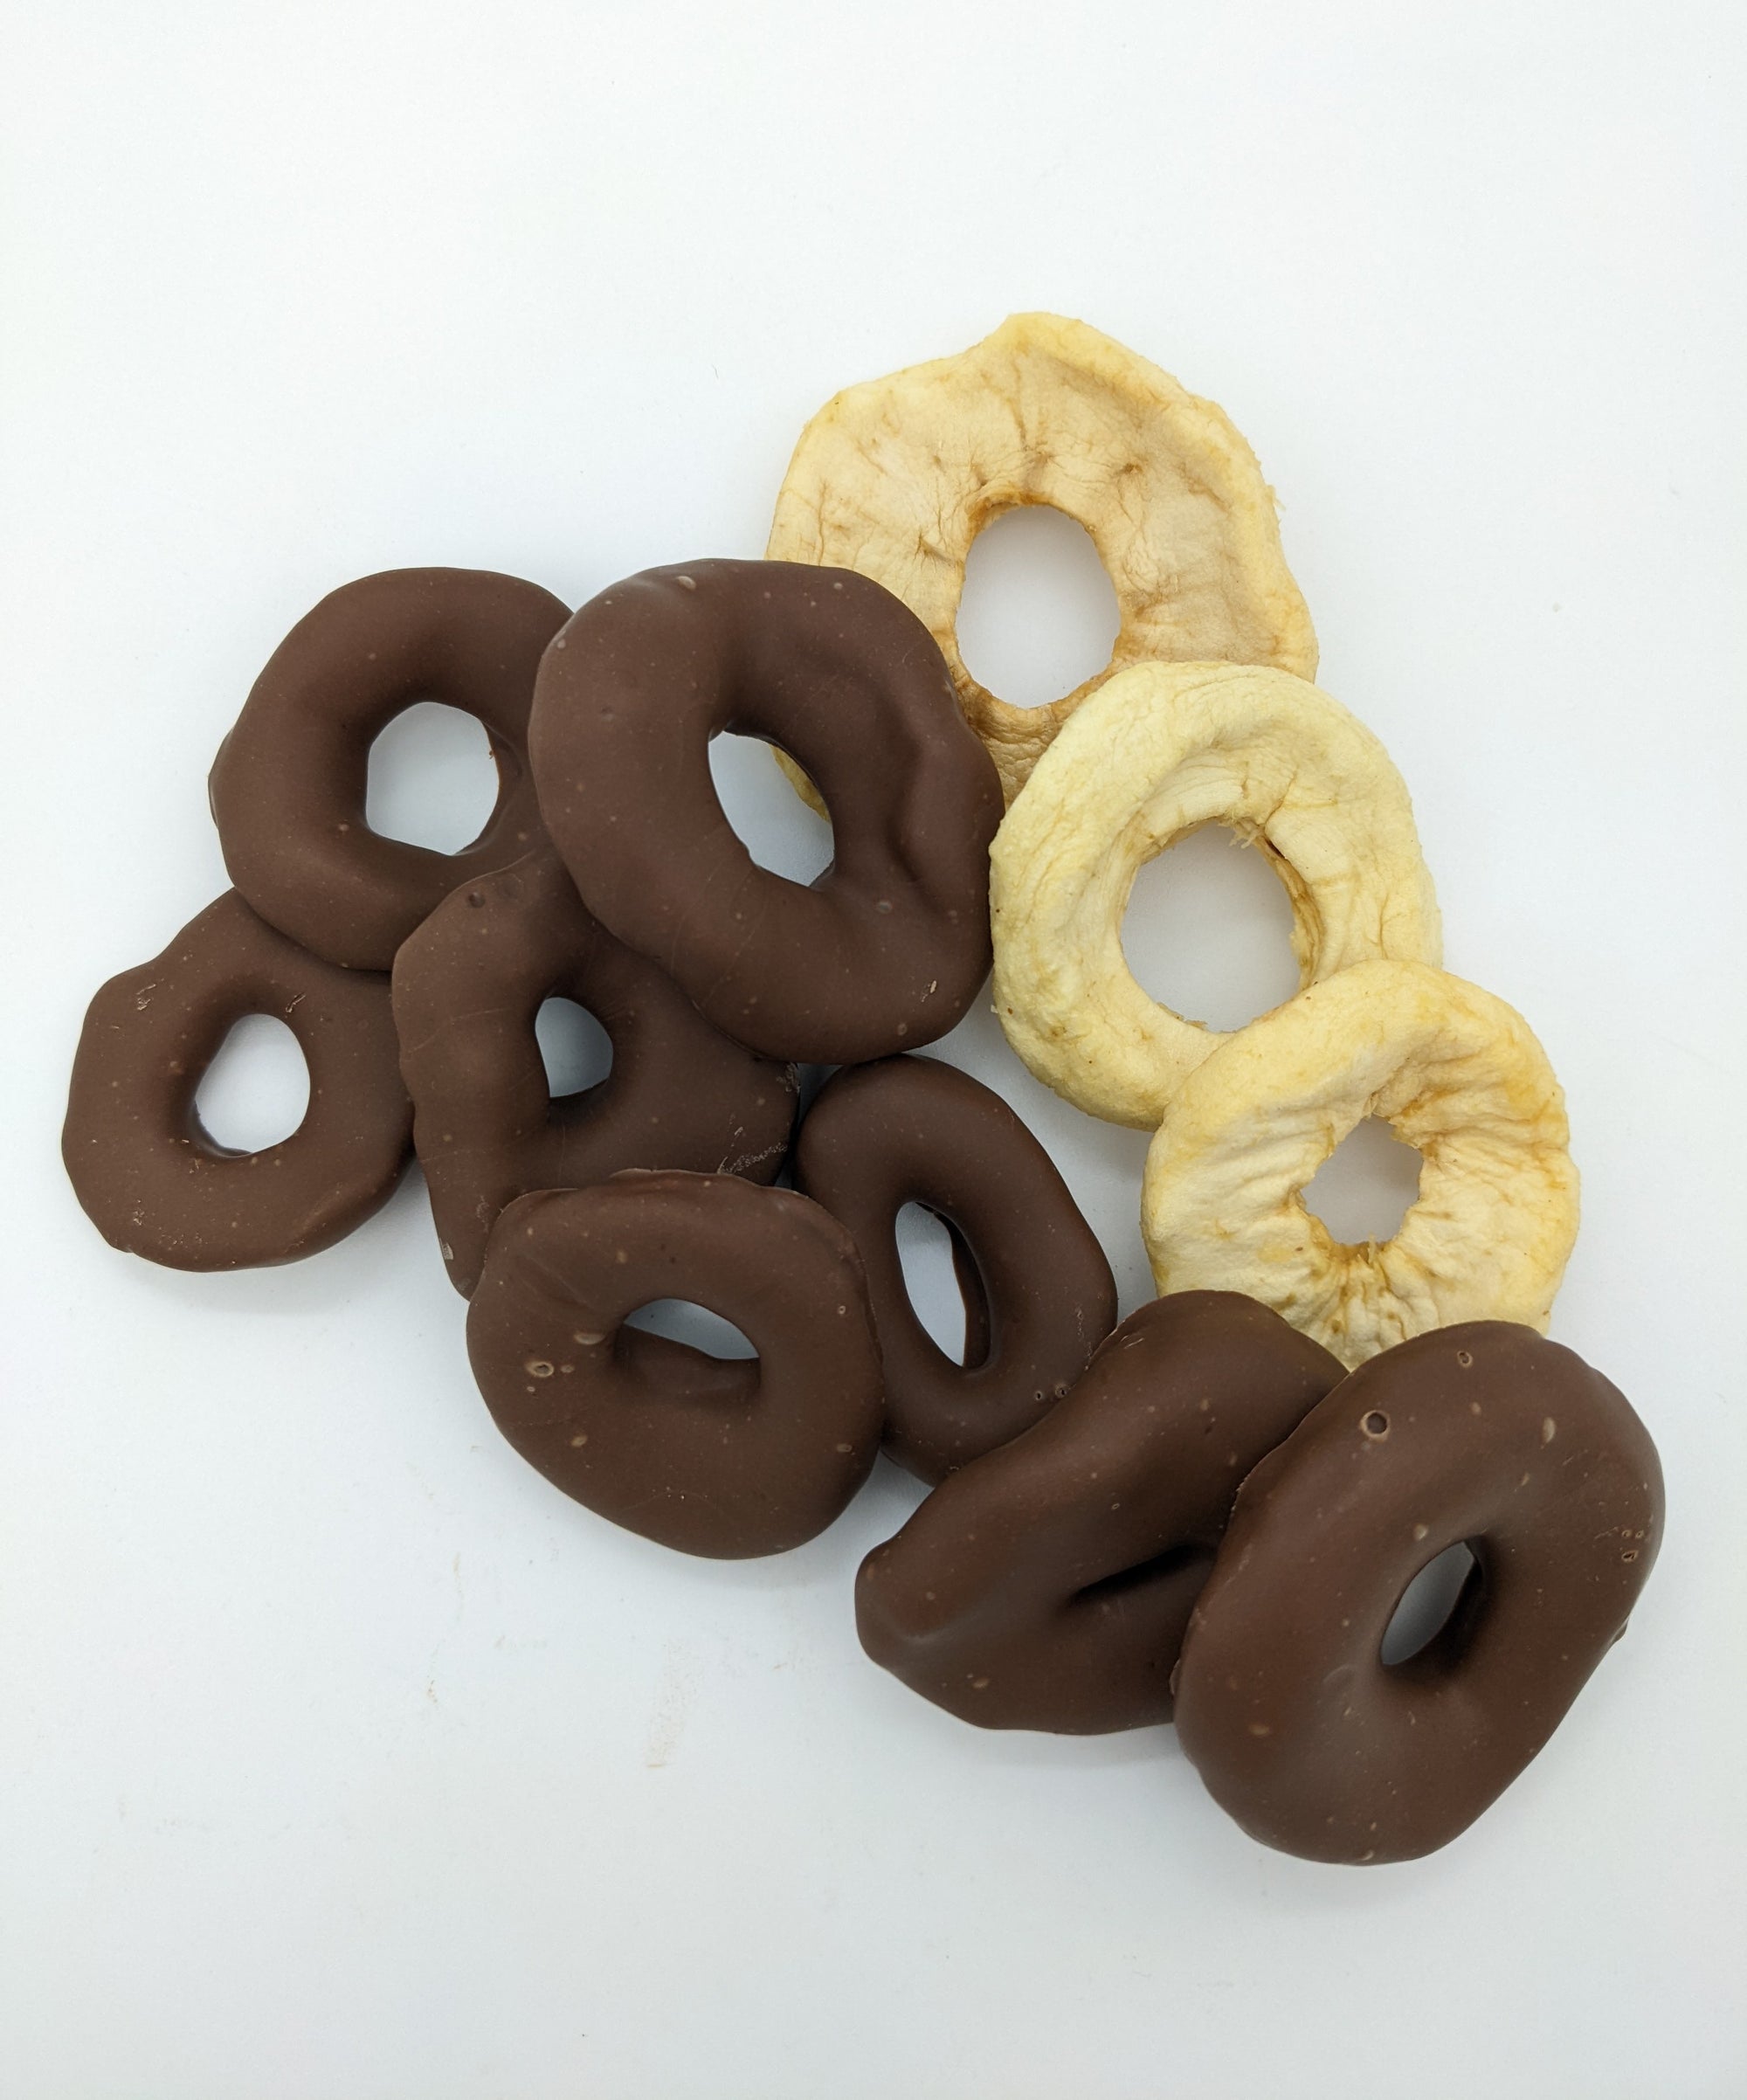 Apple rings, Chocolate Covered